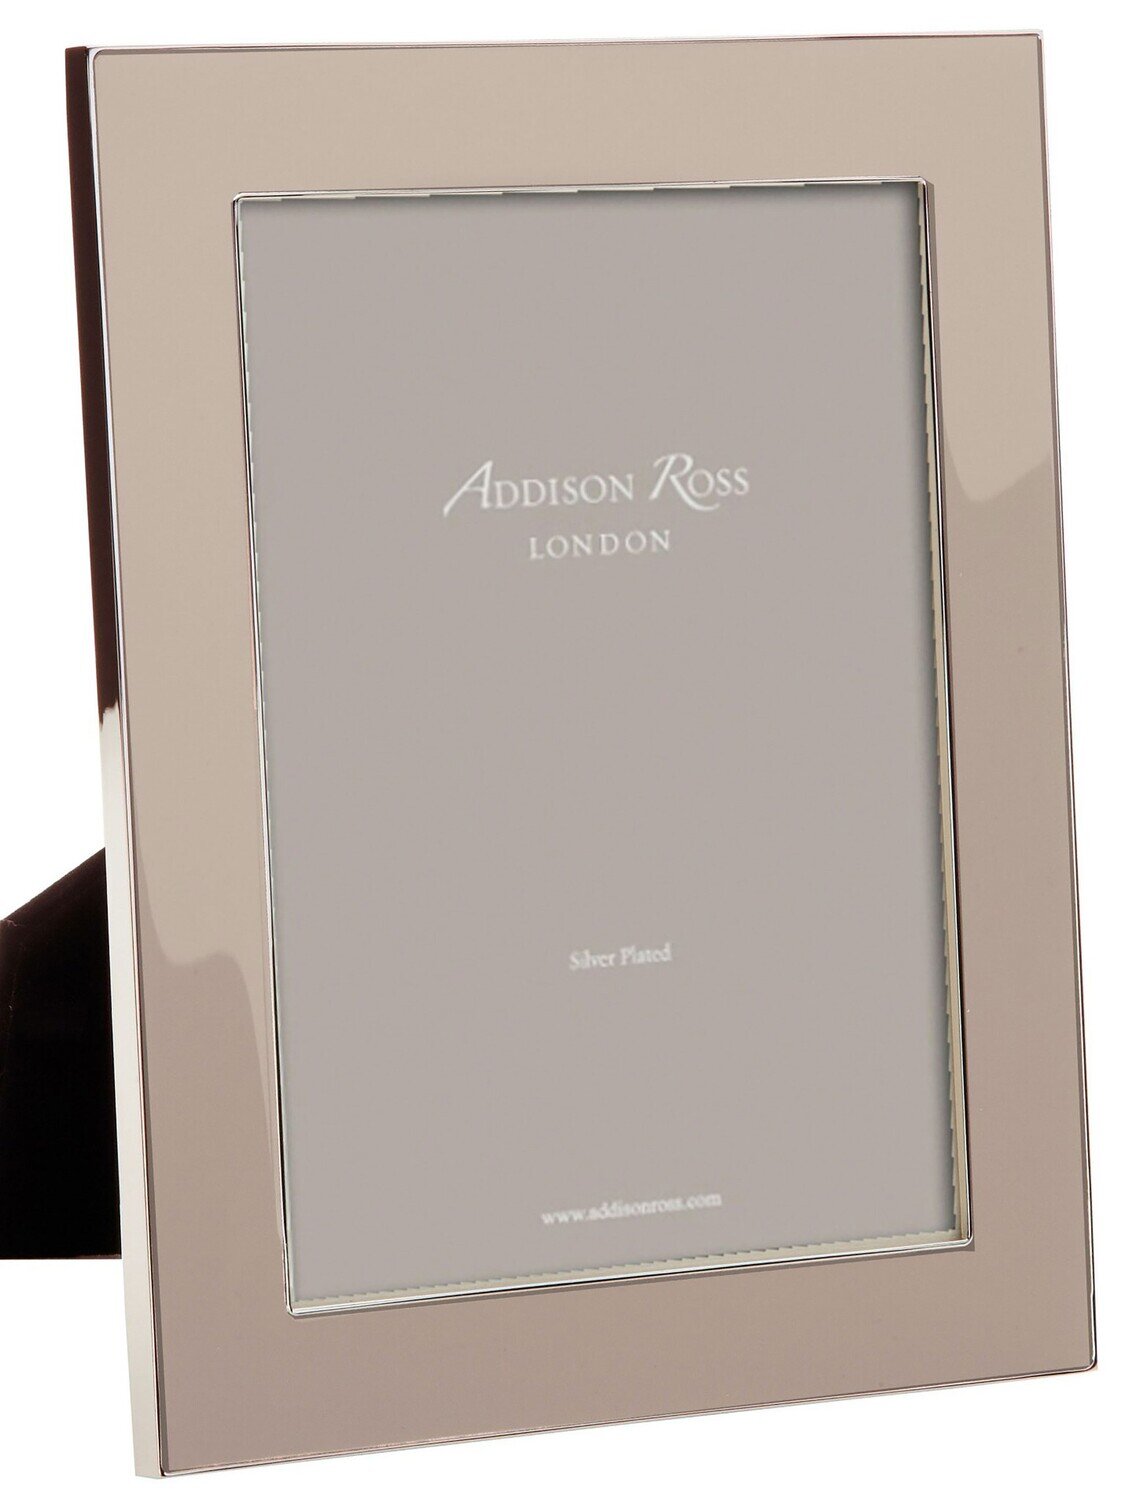 Addison Ross 8 x 10 Inch 24mm Pebble Enamel Picture Frame Silver Plate FR0791